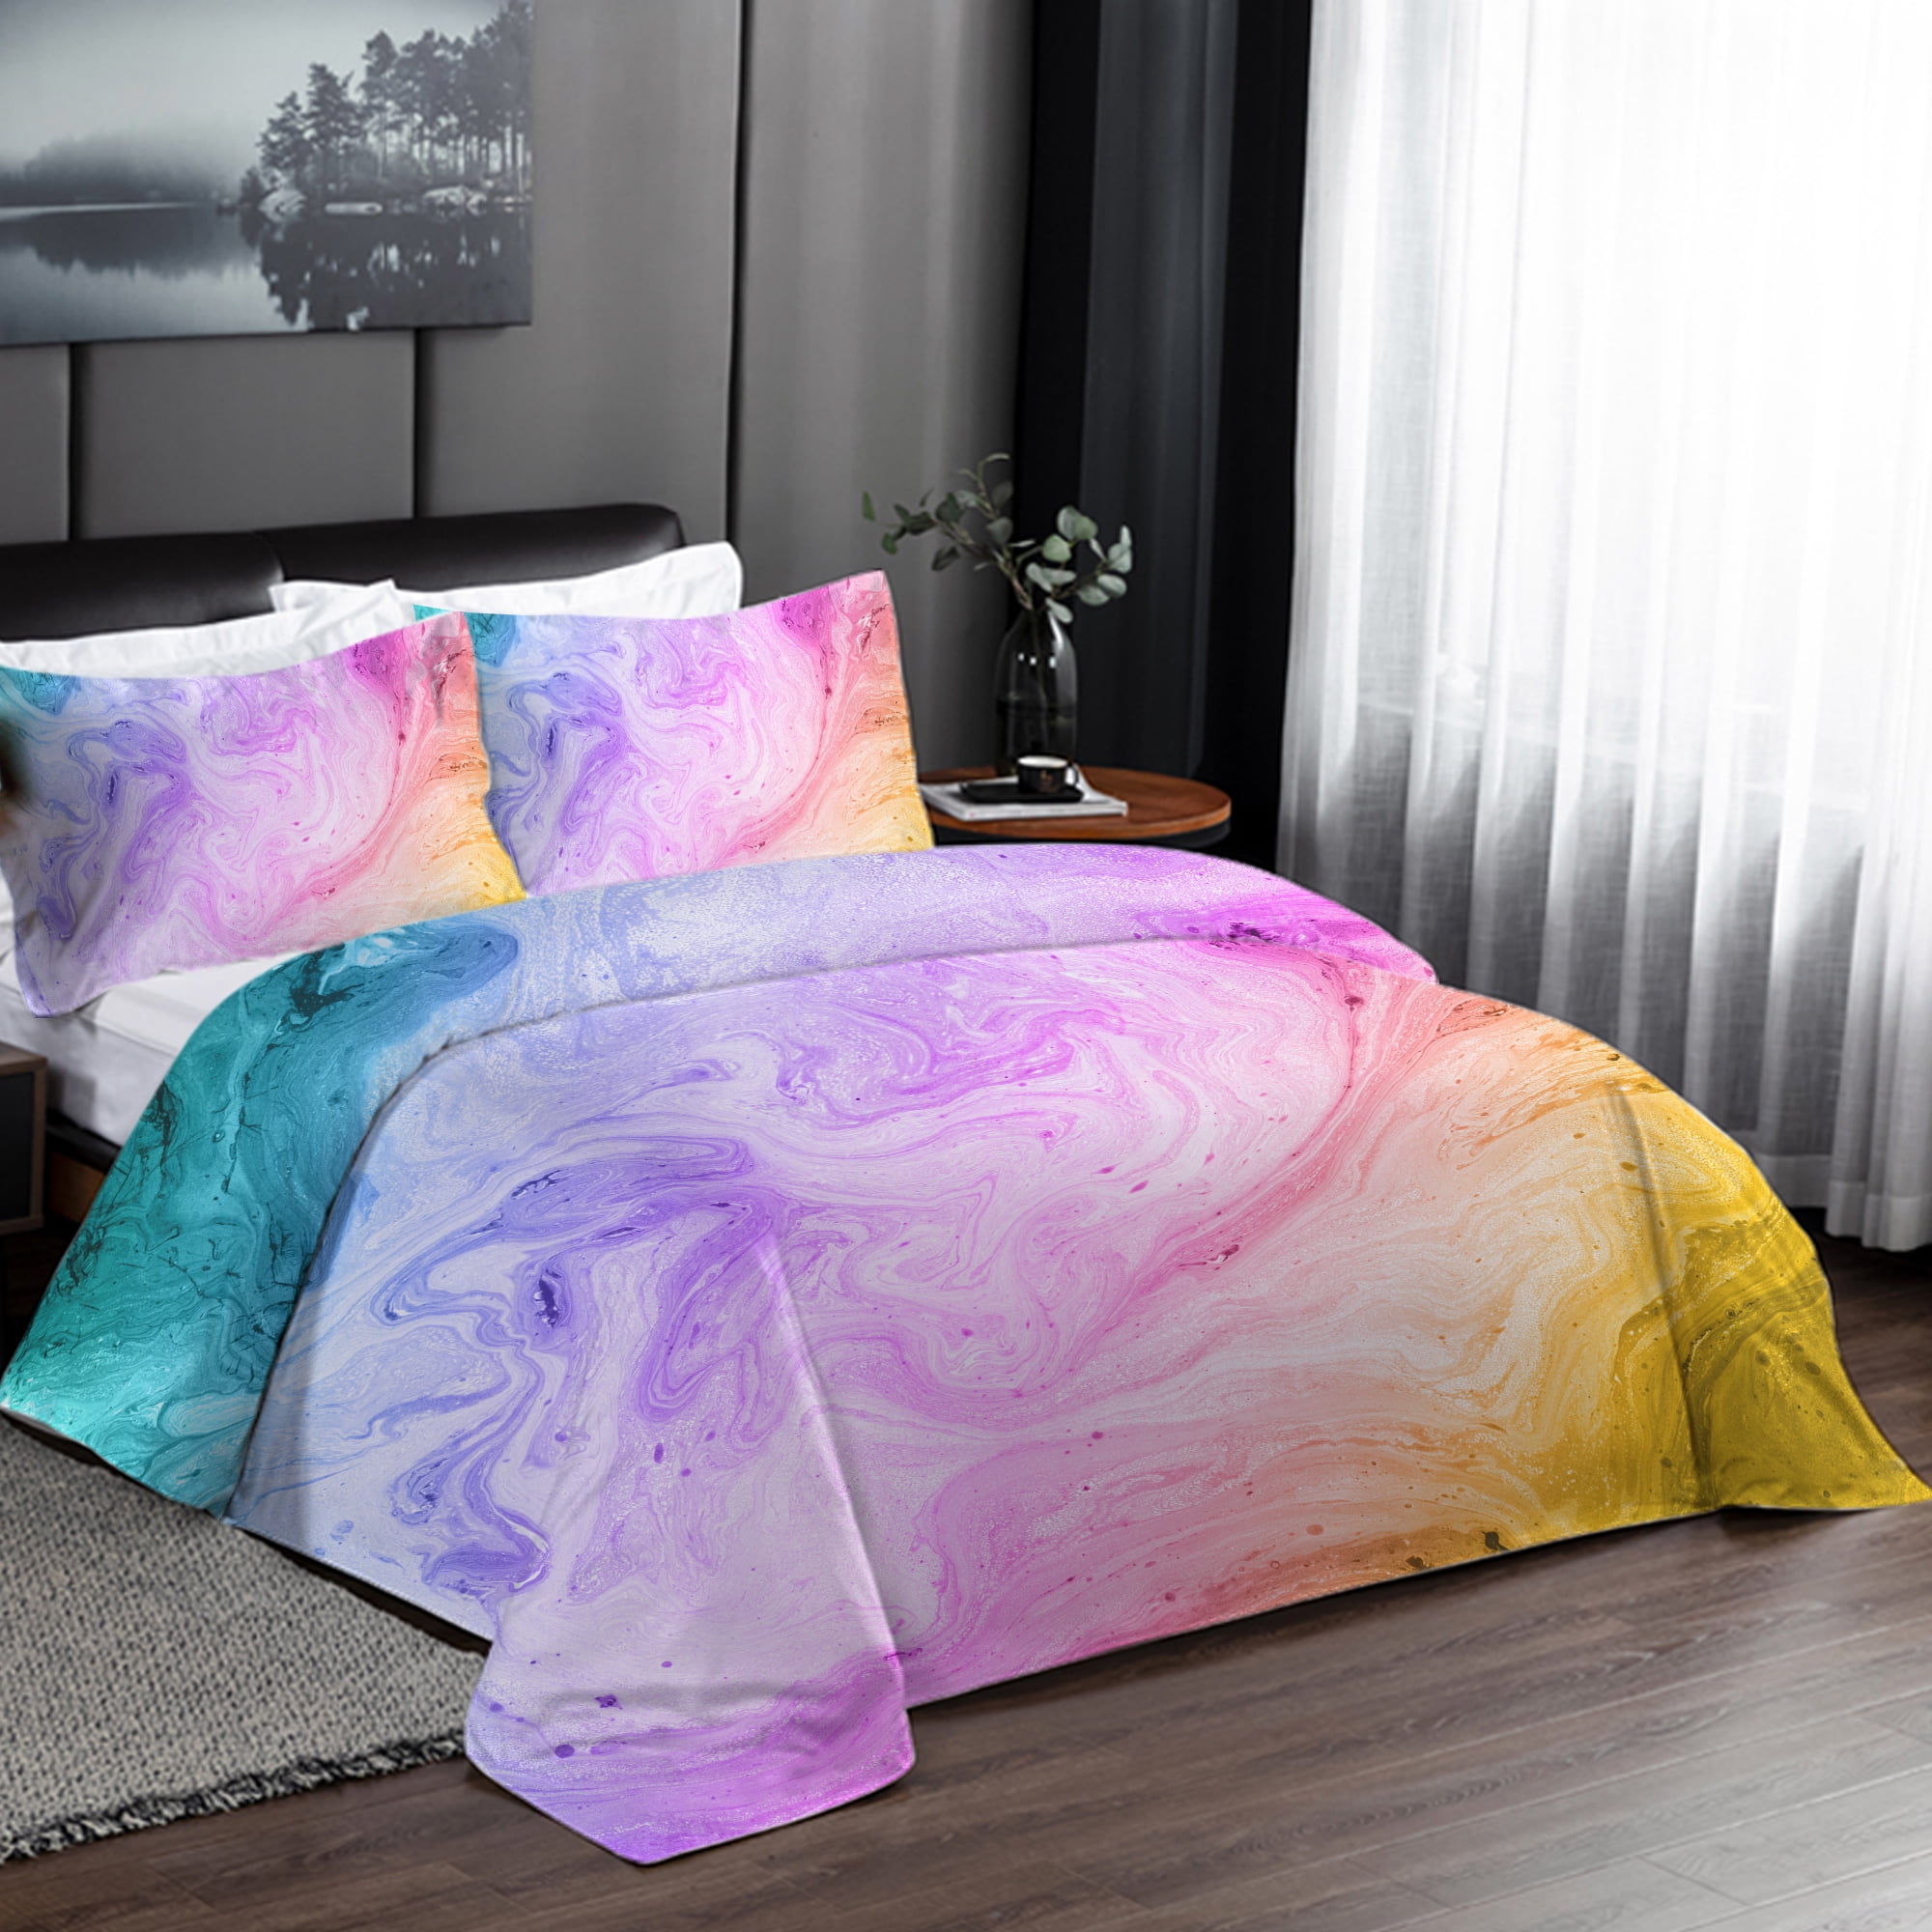 Queen BlessLiving Colorful Marble Bedding Pastel Pink Blue Purple Duvet Cover Set Marble Abstract Art Bed Set 3 Piece Bright Girly Bedspreads